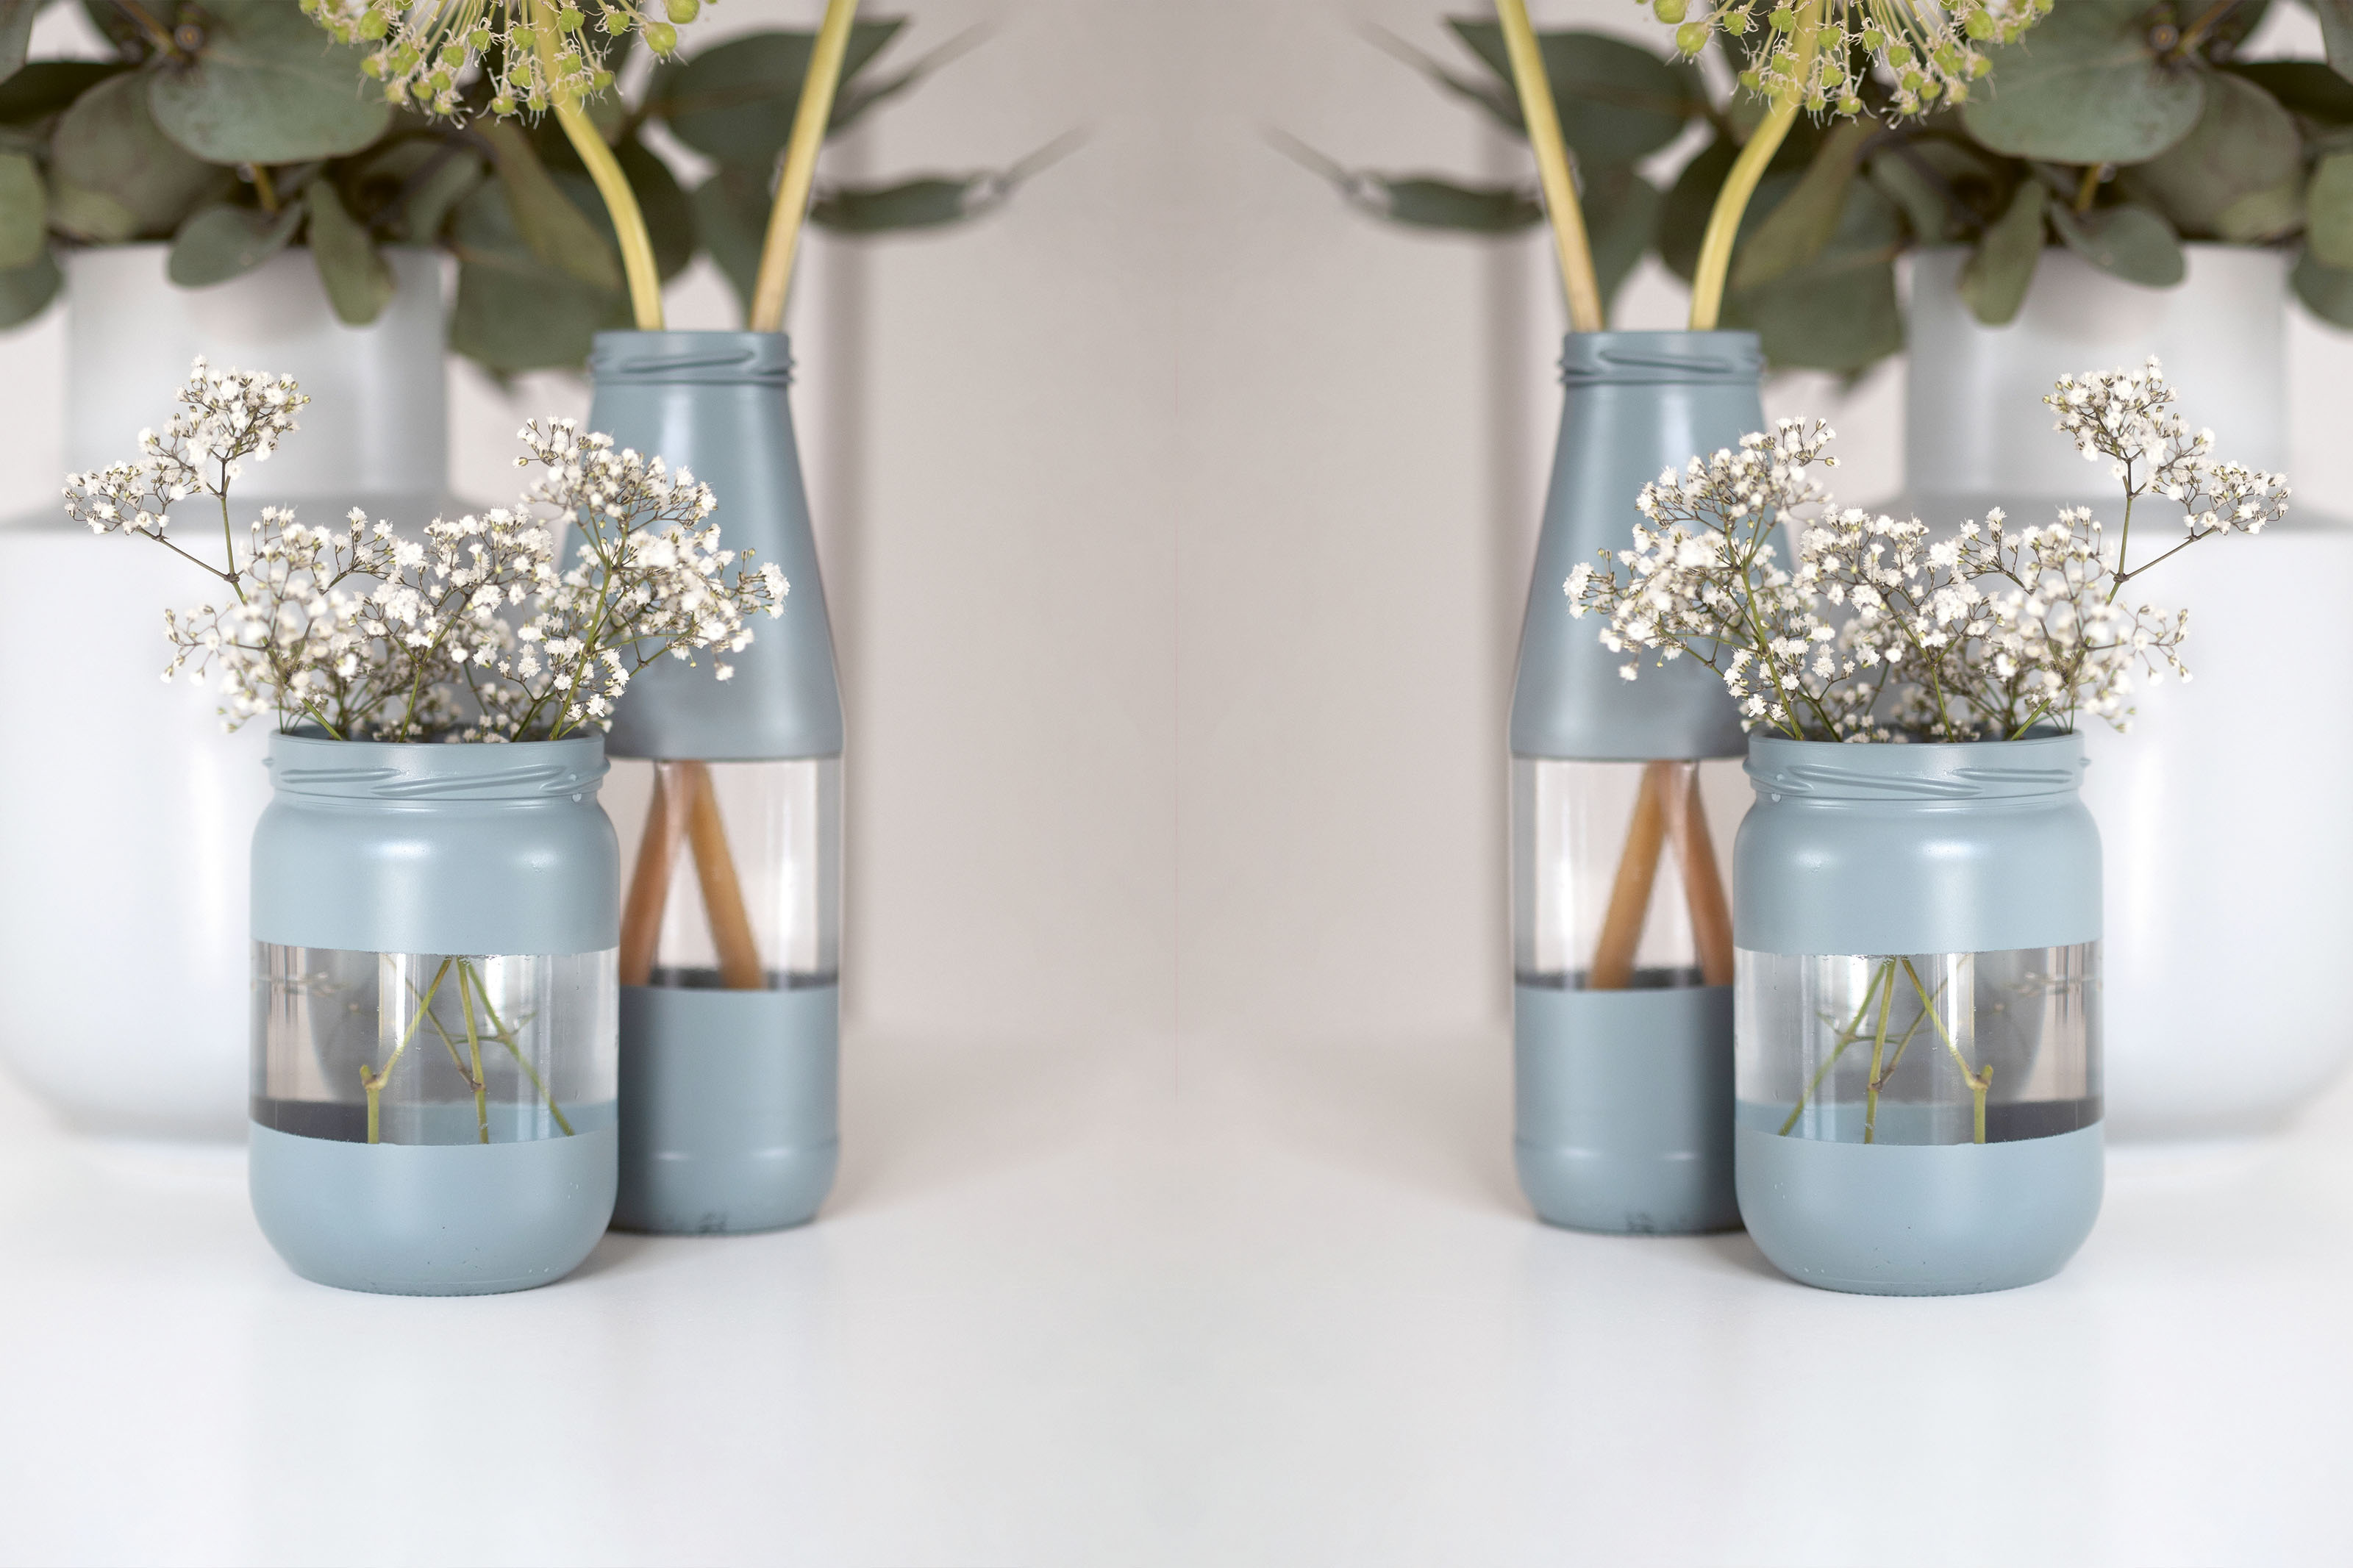  Colourful vases - using homemade chalk paint, you can turn these old containers into a veritable decorative highlight – and bring more colour to the home.